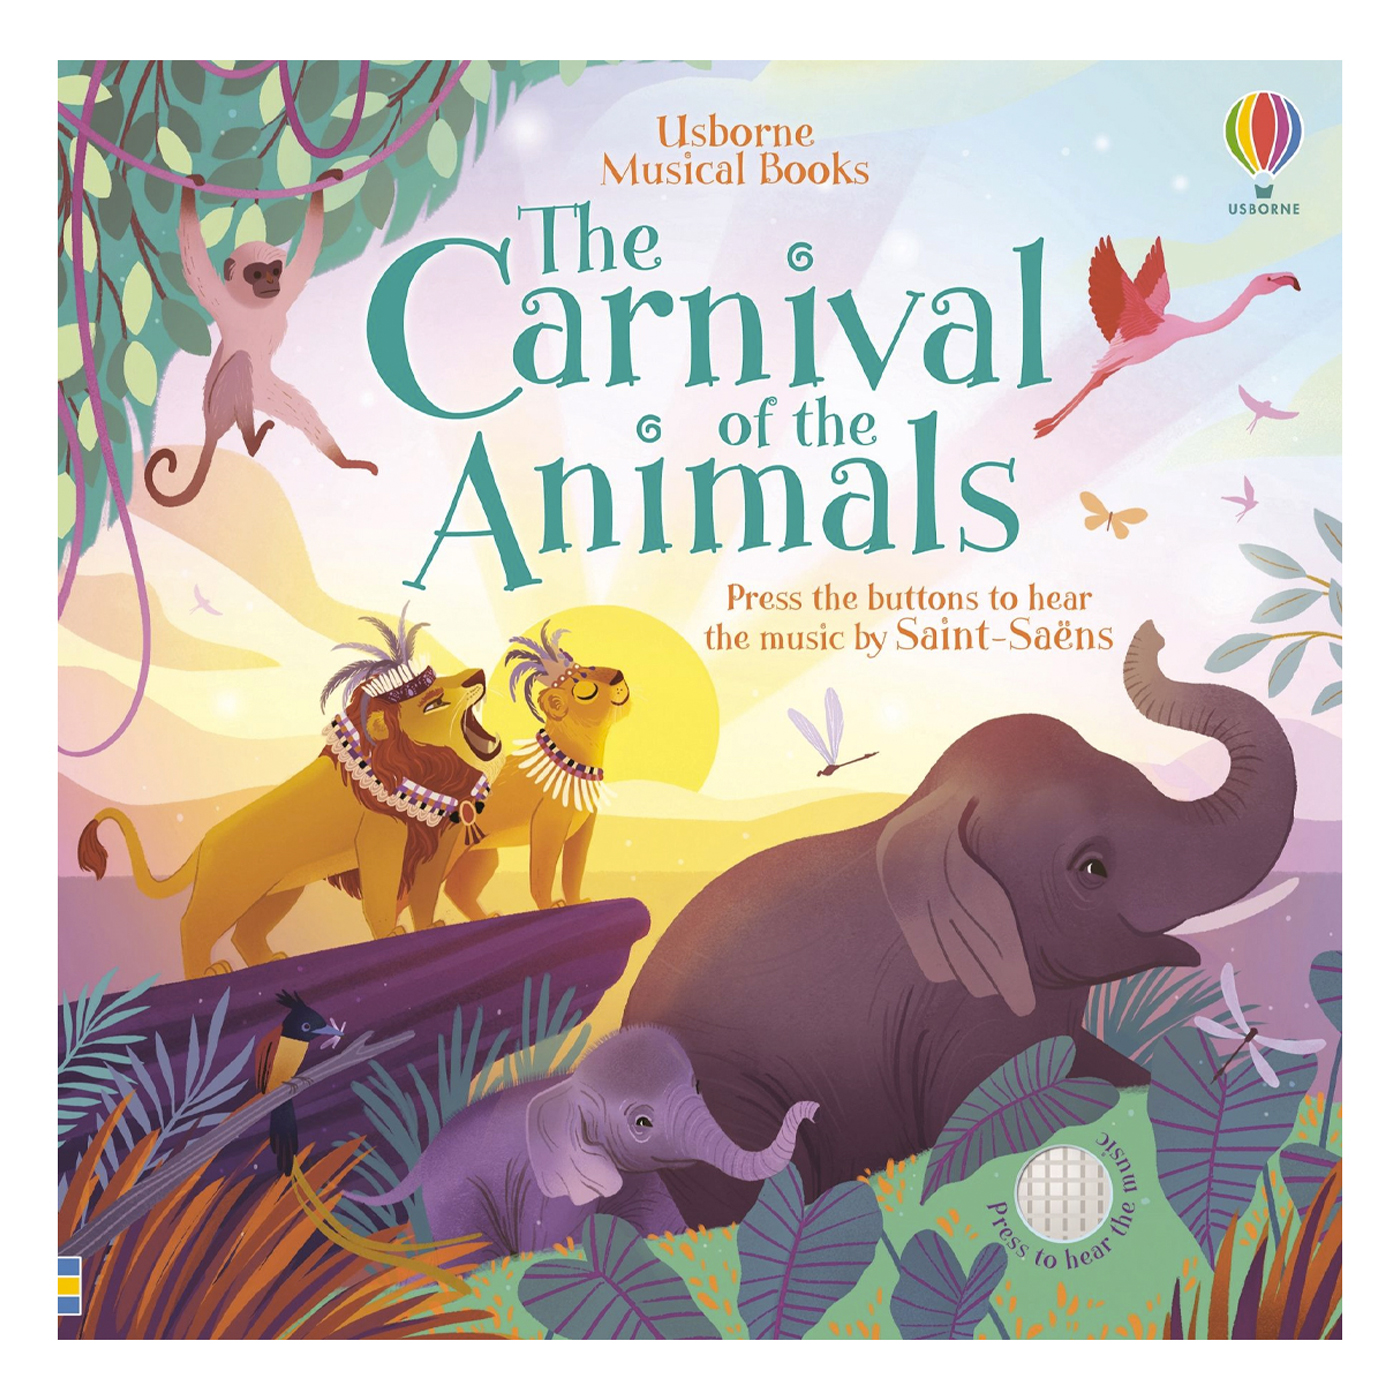 USBORNE Musical Book - The Carnival of the Animals